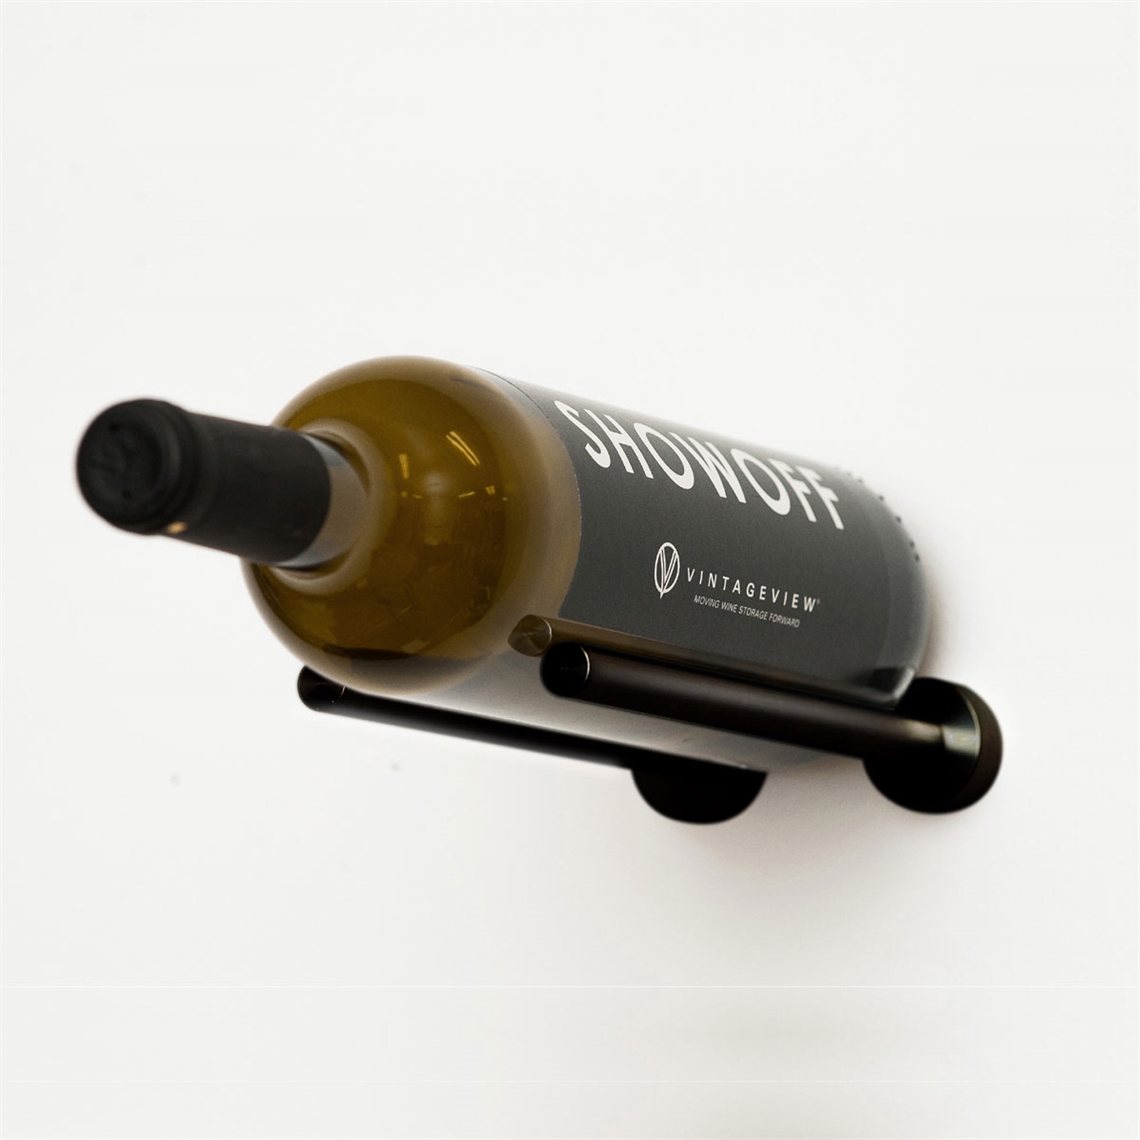 View more wine rack accessories from our Wall Mounted Wine Racks range